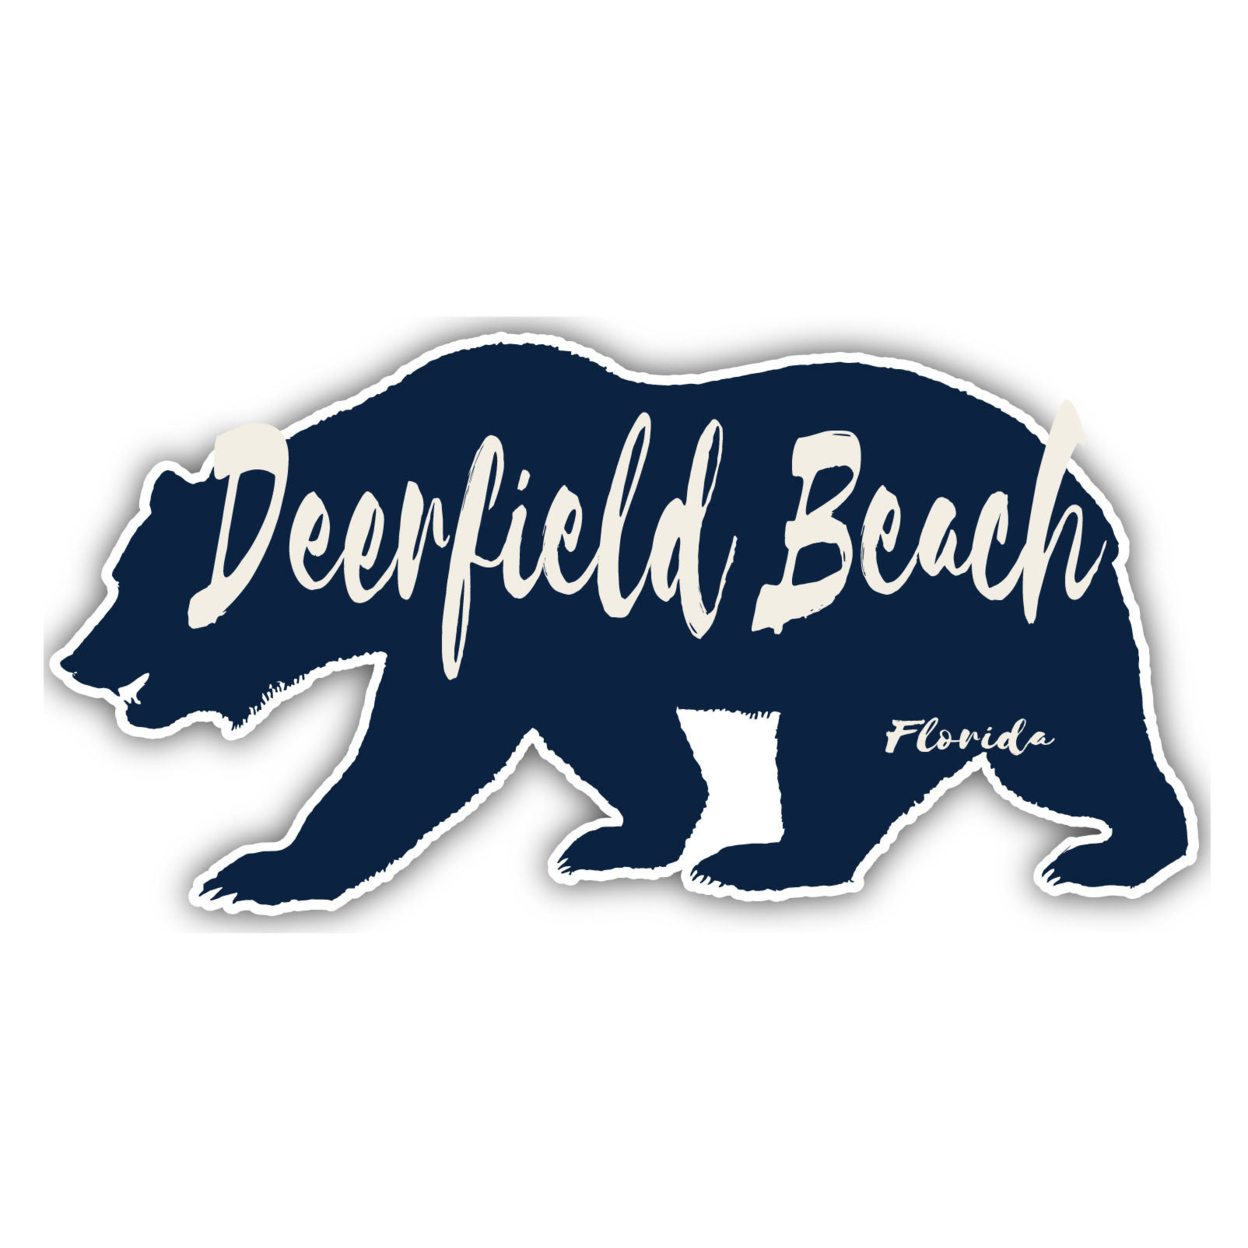 Deerfield Beach Florida Souvenir Decorative Stickers (Choose Theme And Size) - 4-Pack, 2-Inch, Great Outdoors